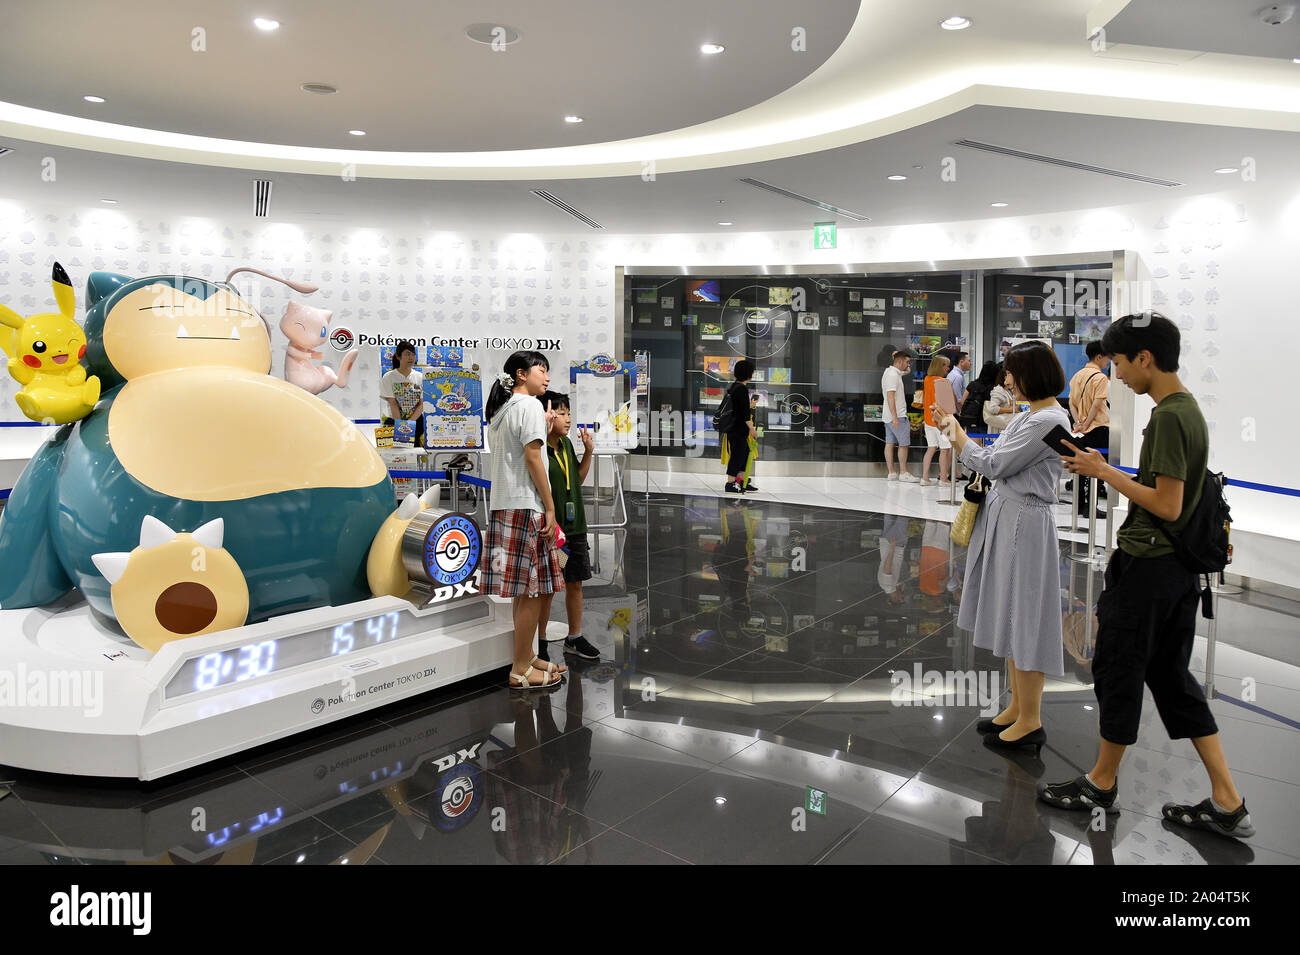 Pokemon Center Tokyo Japan High Resolution Stock Photography And Images Alamy